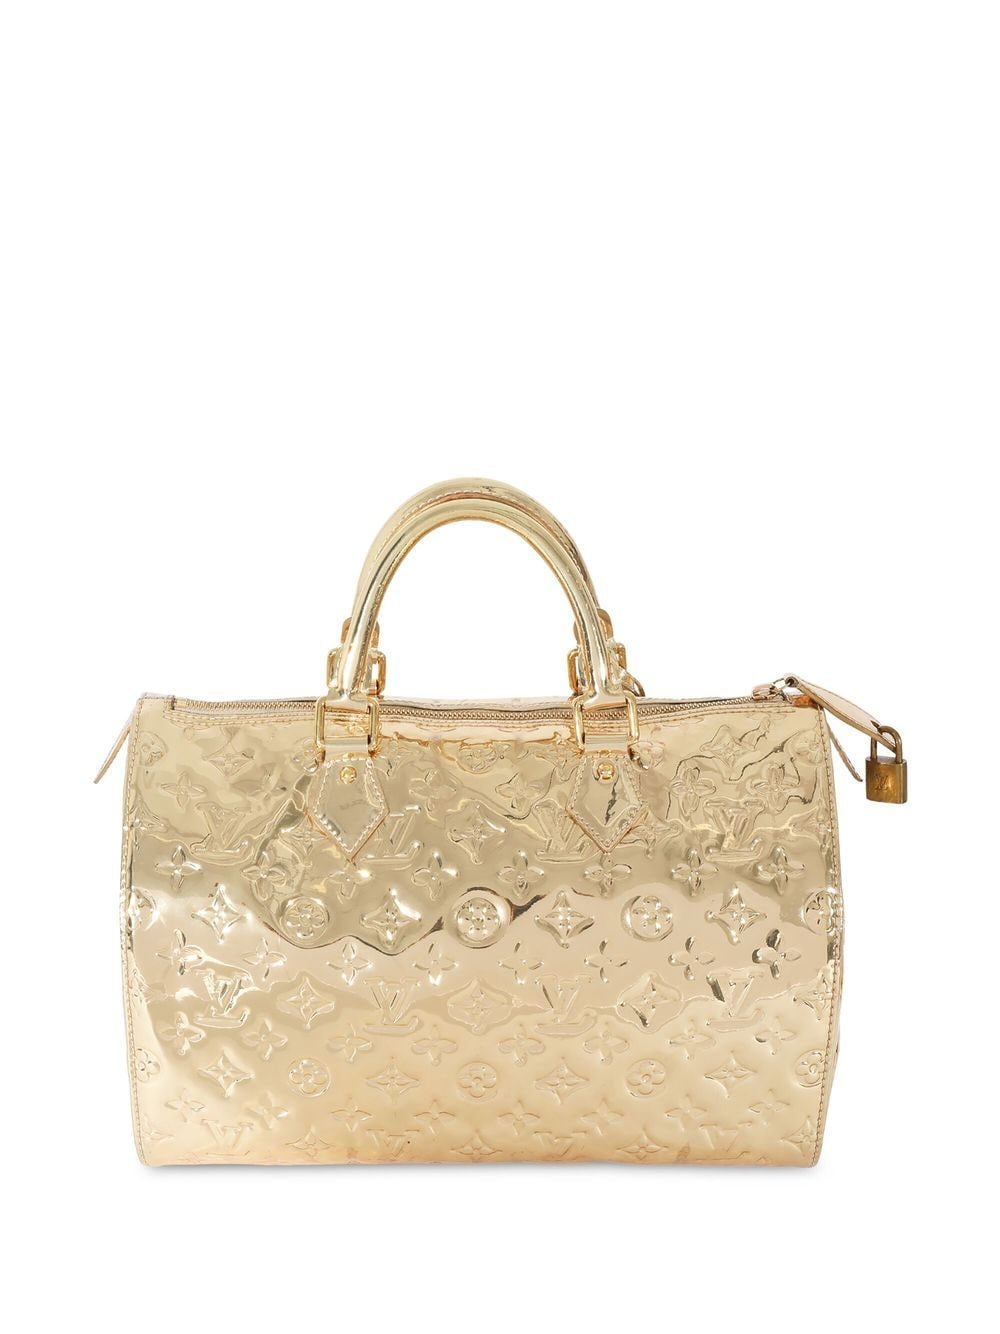 Louis Vuitton Pre-Owned pre-owned Speedy 30 Bag - Farfetch